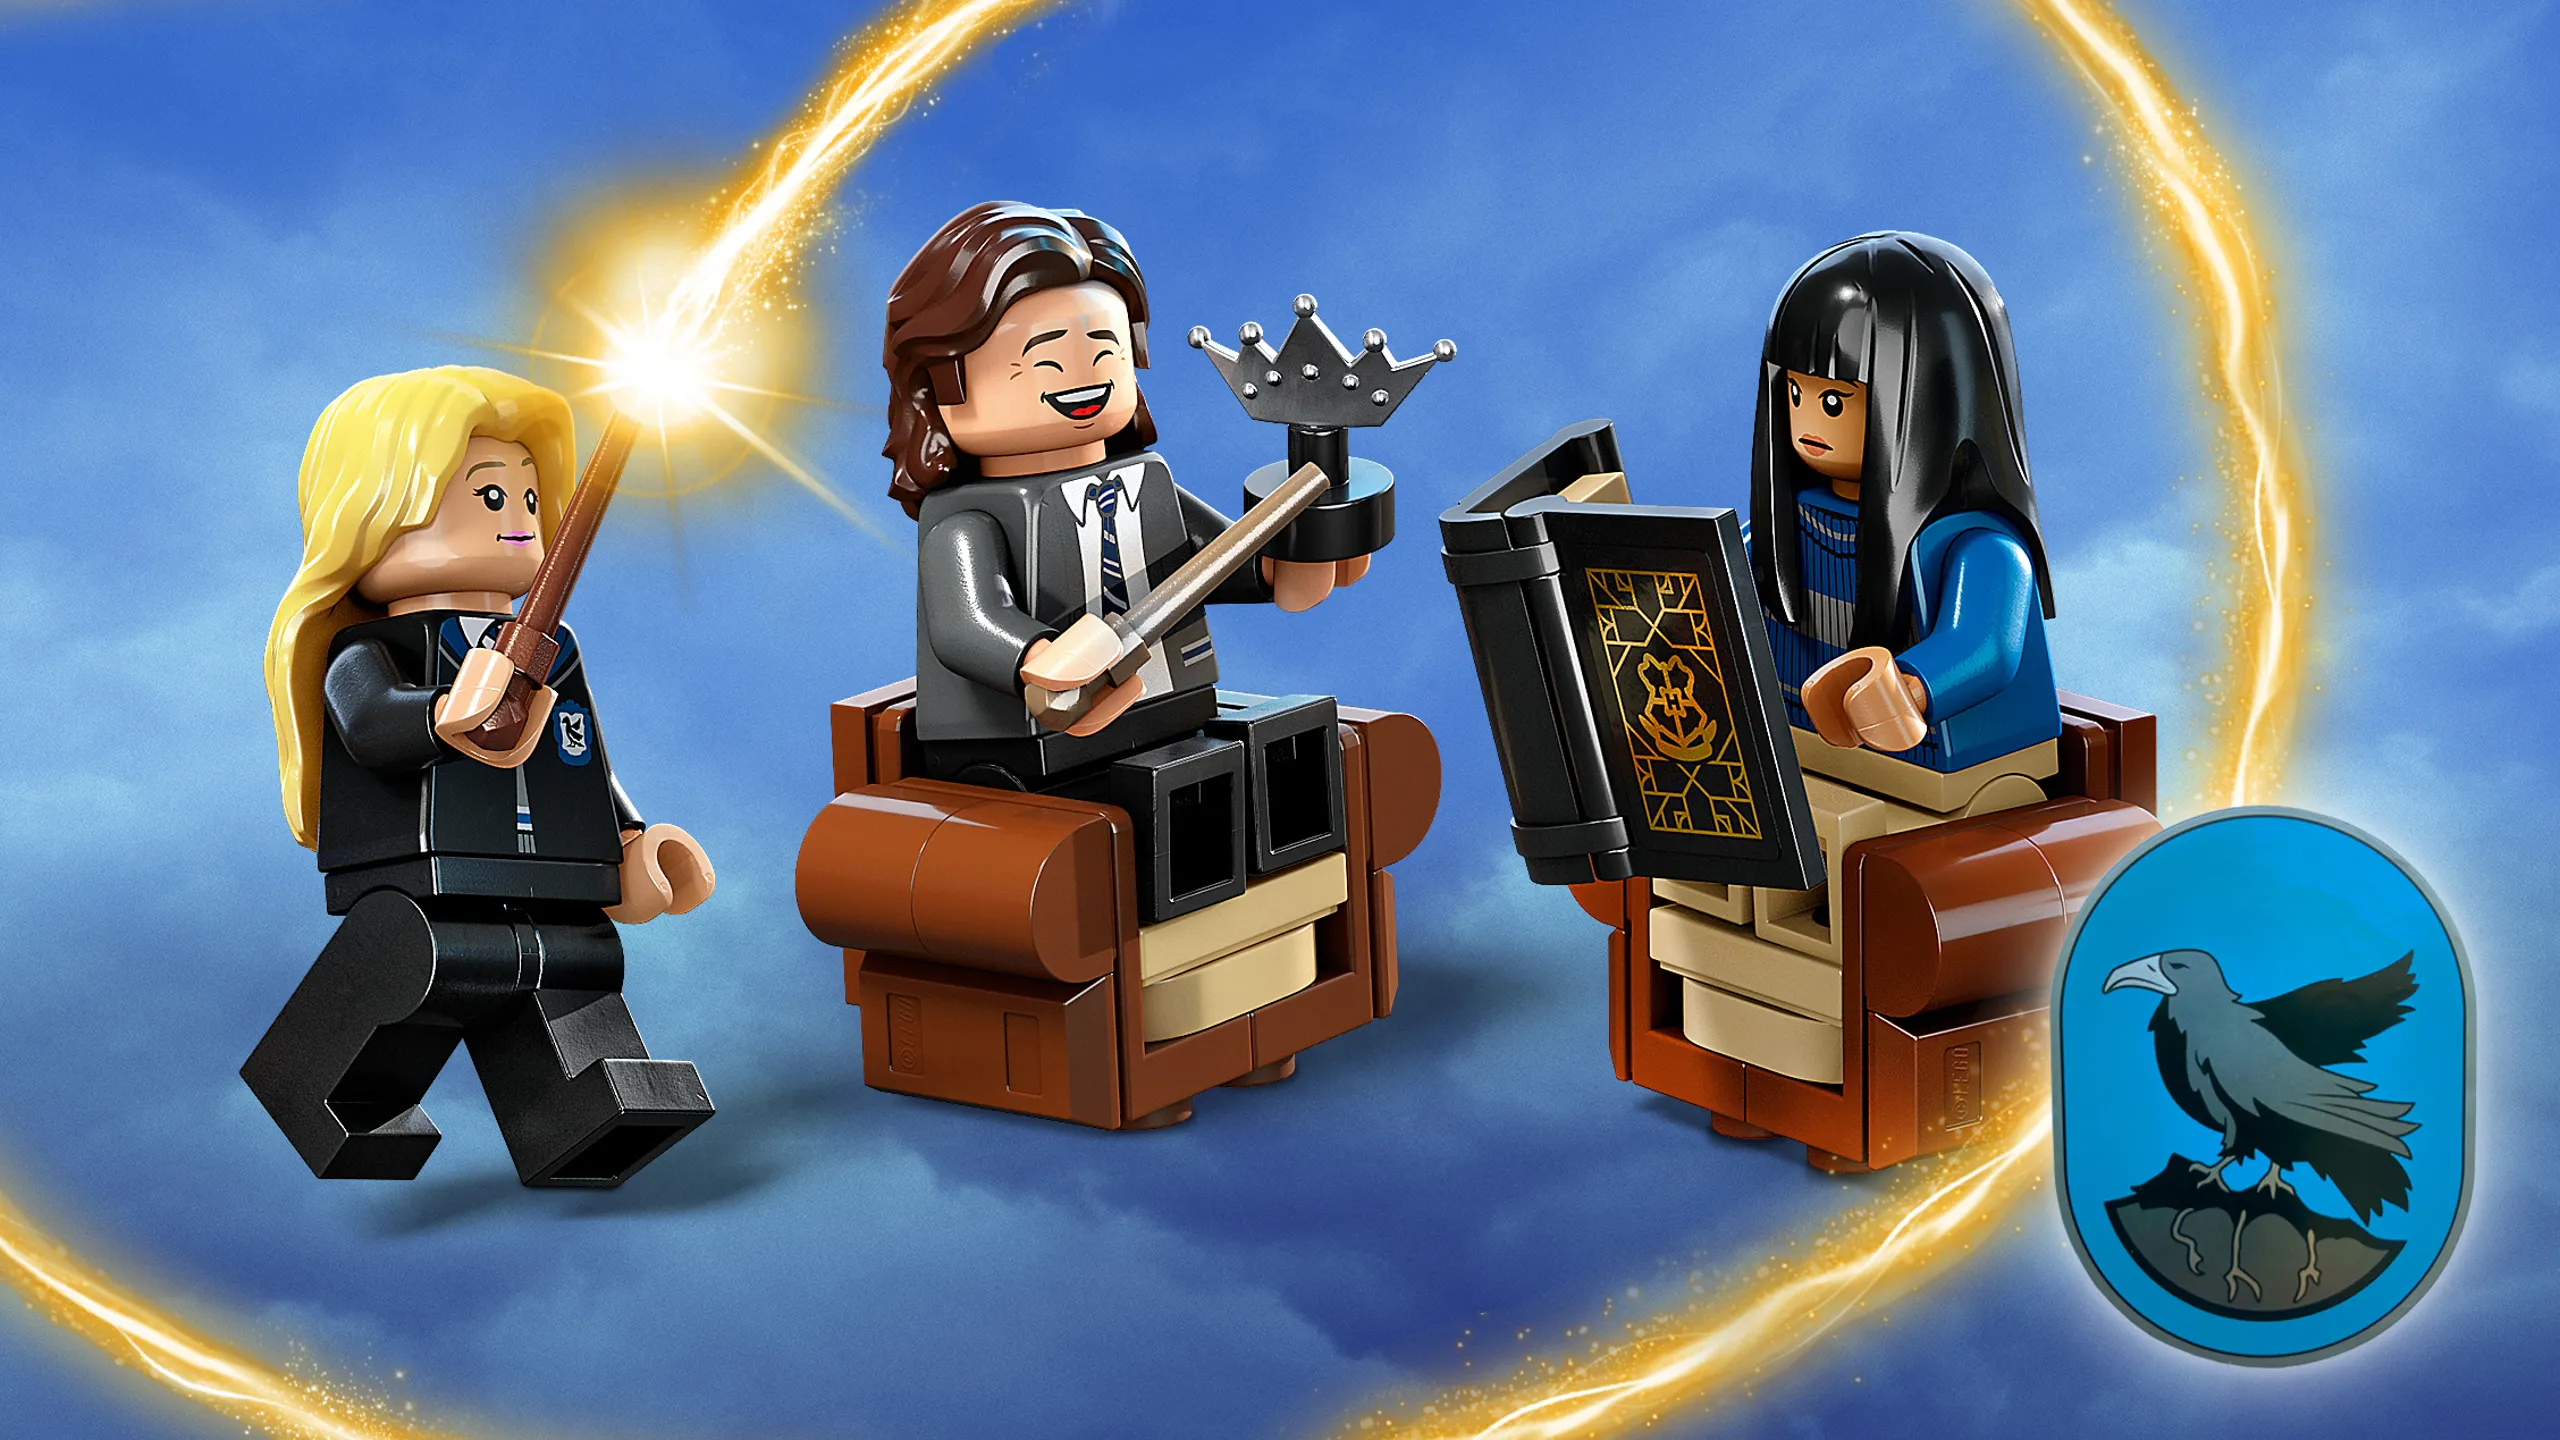 Explore the Magical World of Hogwarts with LEGO Harry Potter